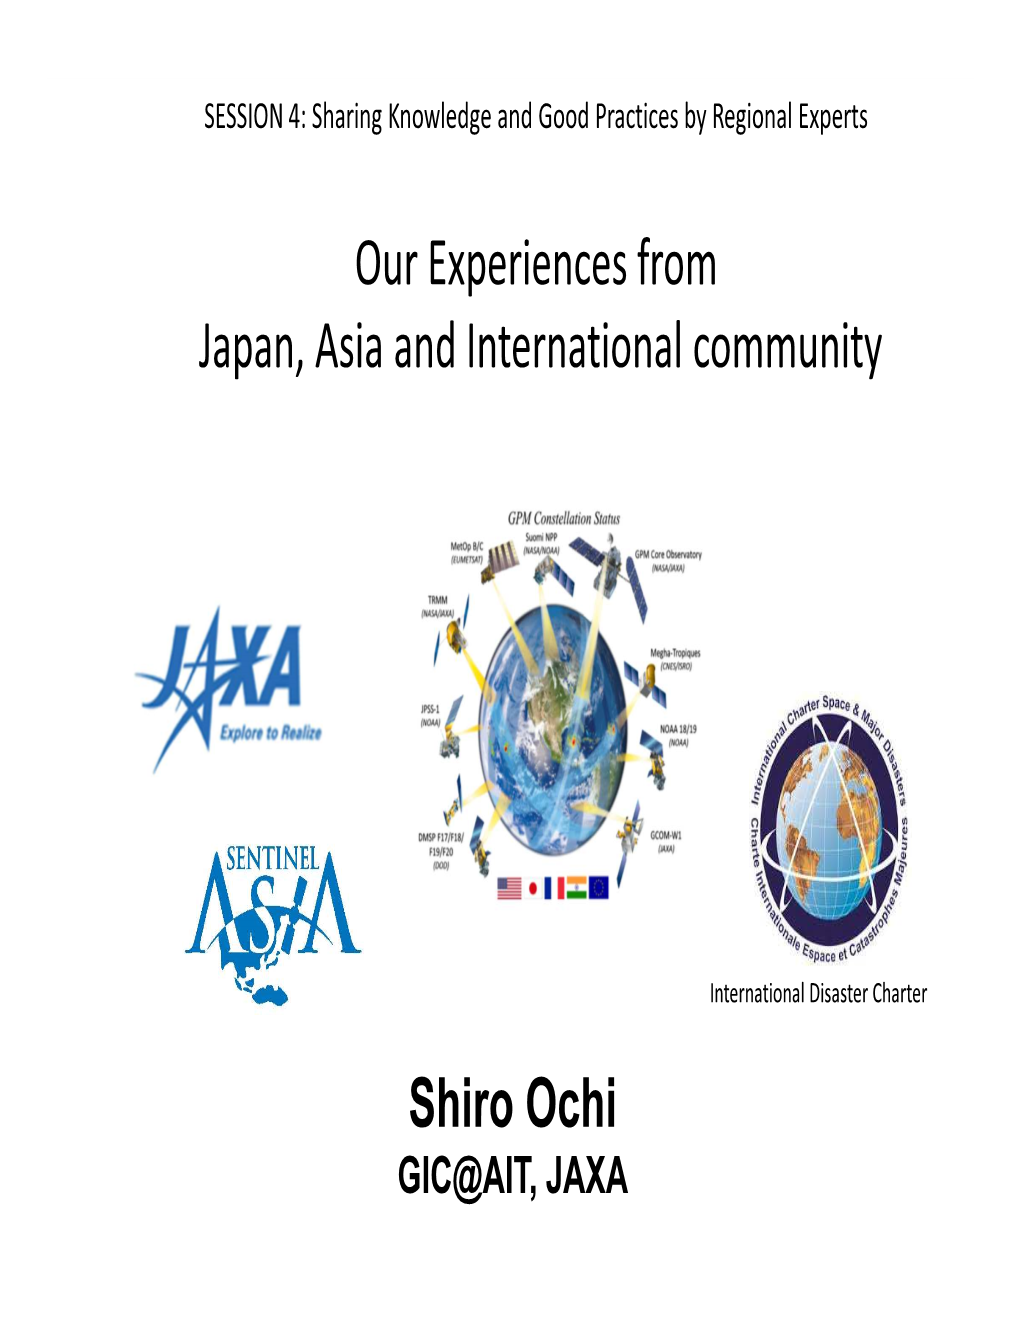 Shiro Ochi Our Experiences from Japan, Asia and International